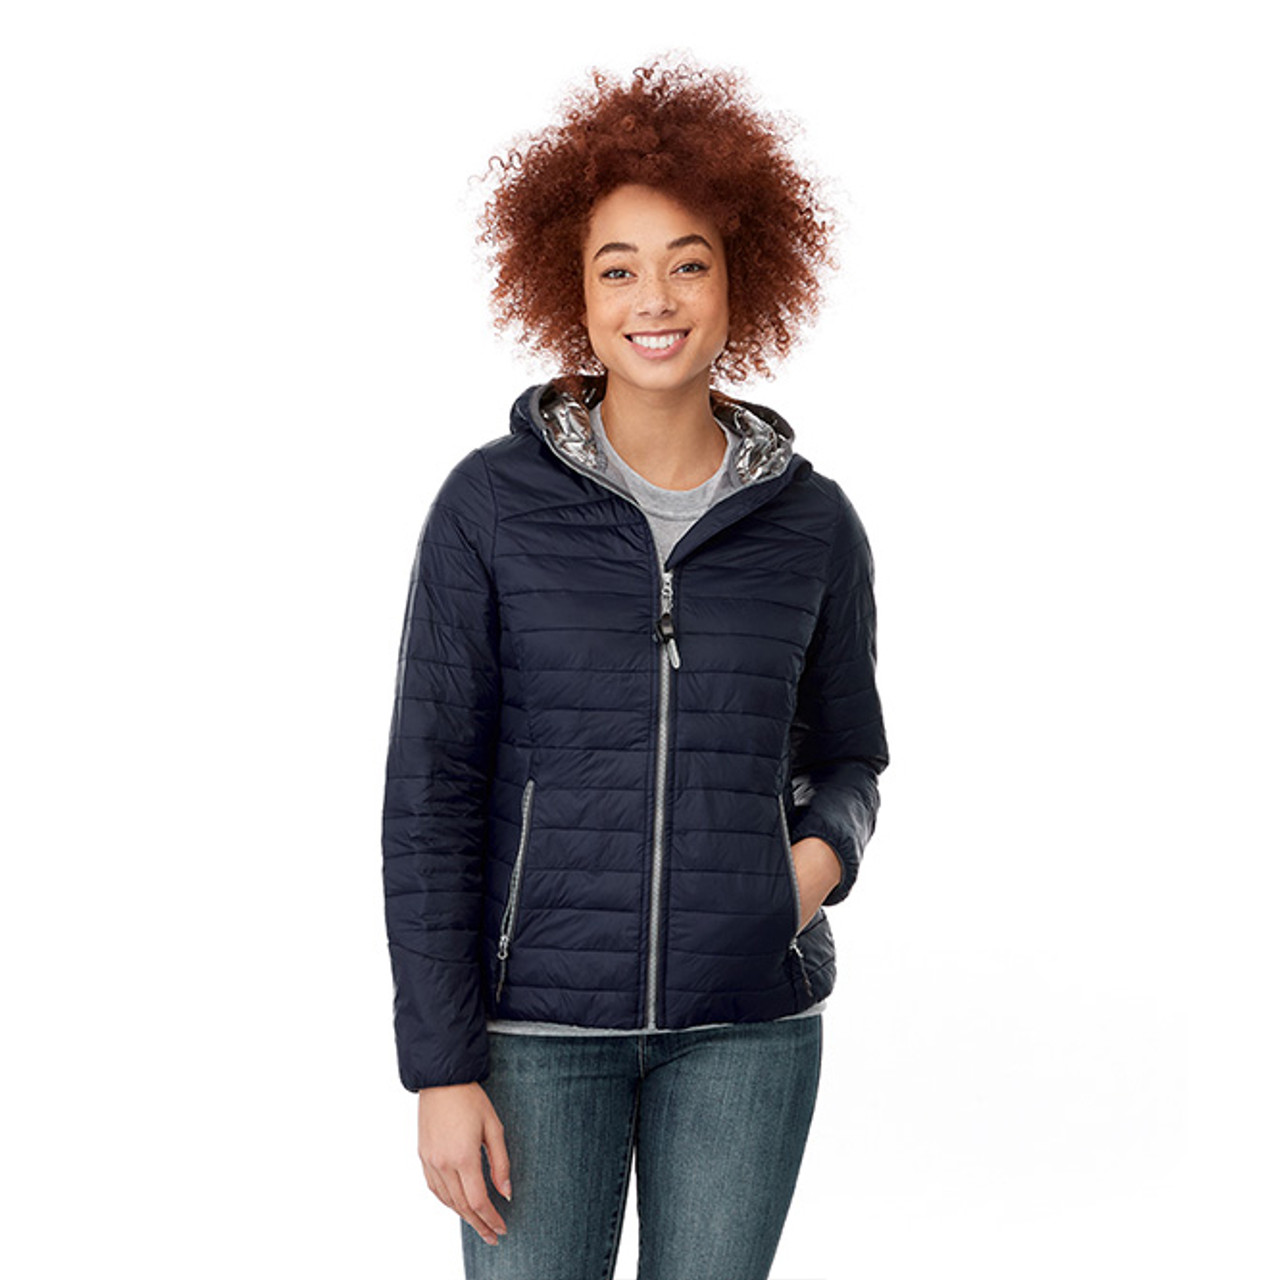 Silverton Women's Packable Insulated Jacket